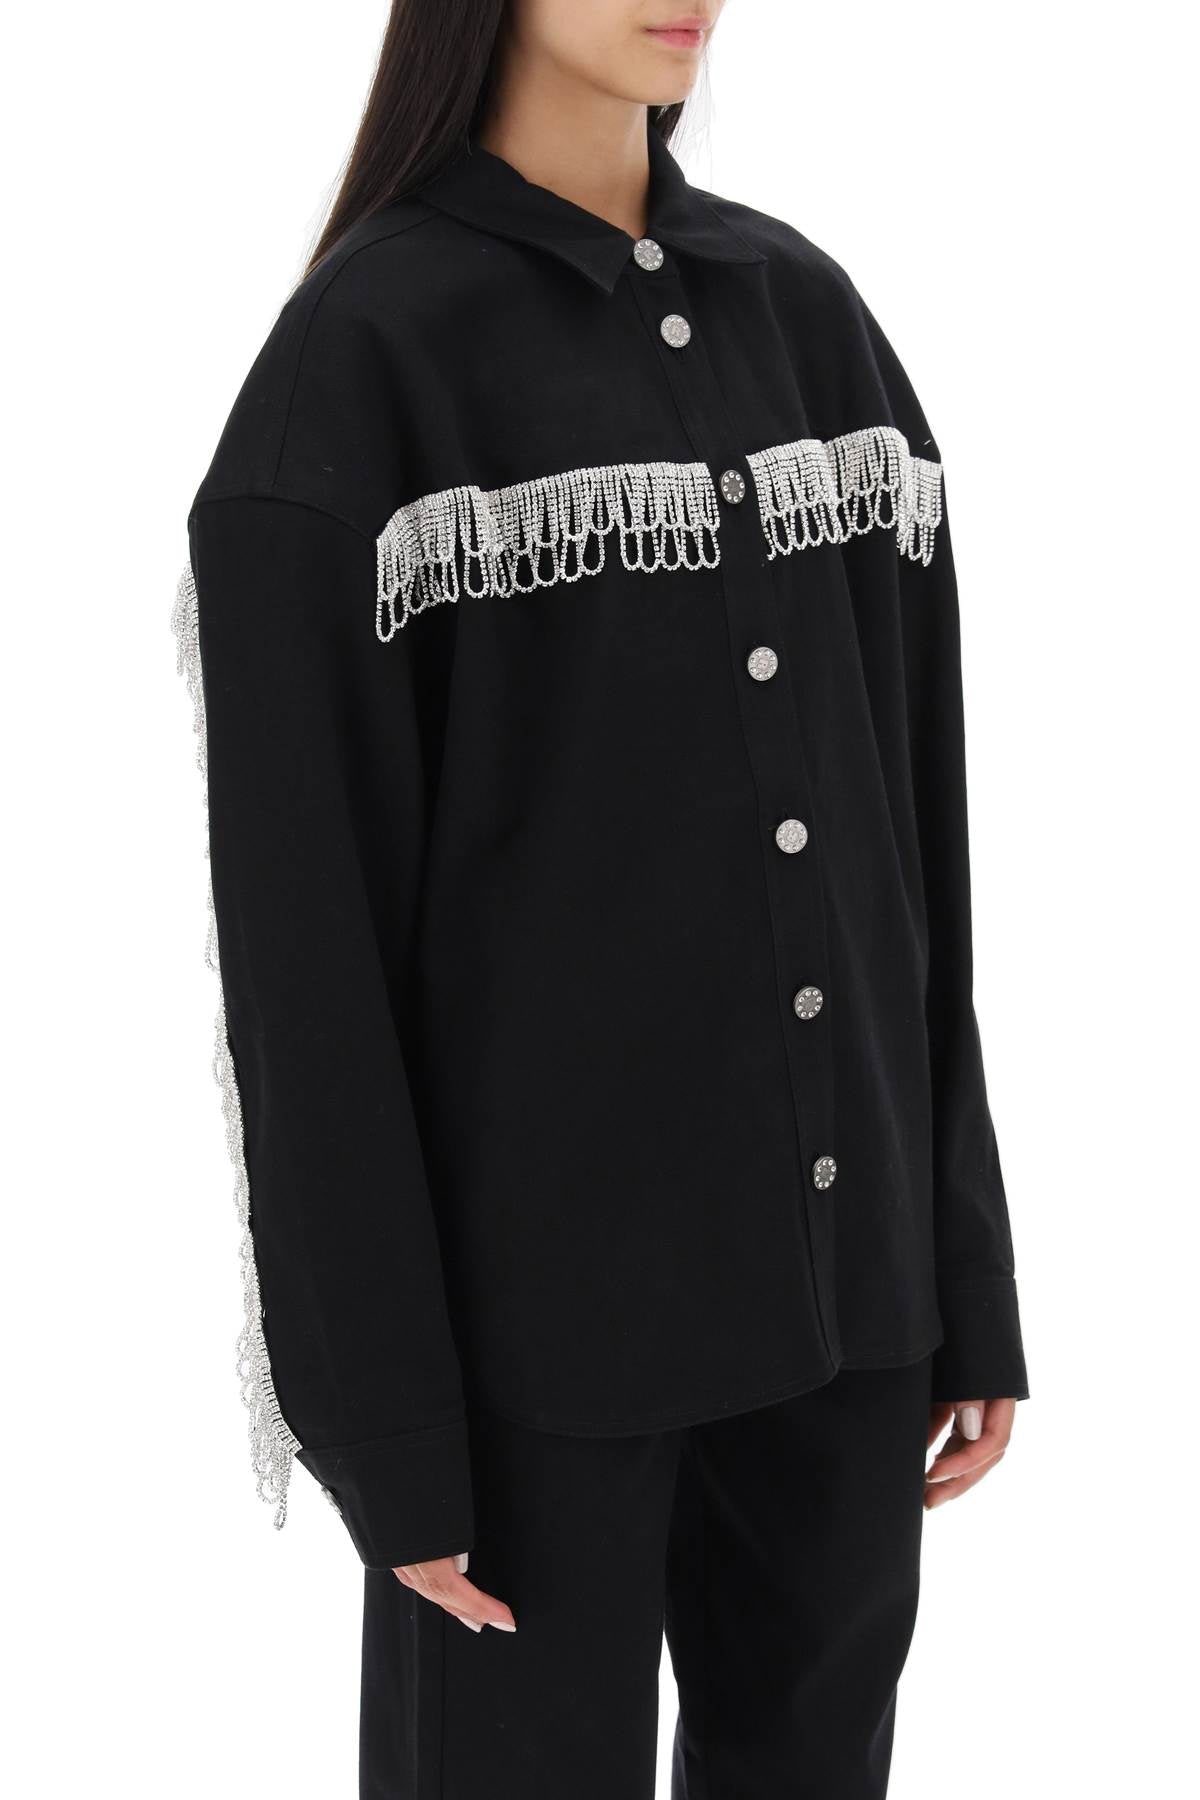 Rotate overshirt with crystal fringes-women > clothing > jackets > casual jackets-Rotate-36-Black-Urbanheer